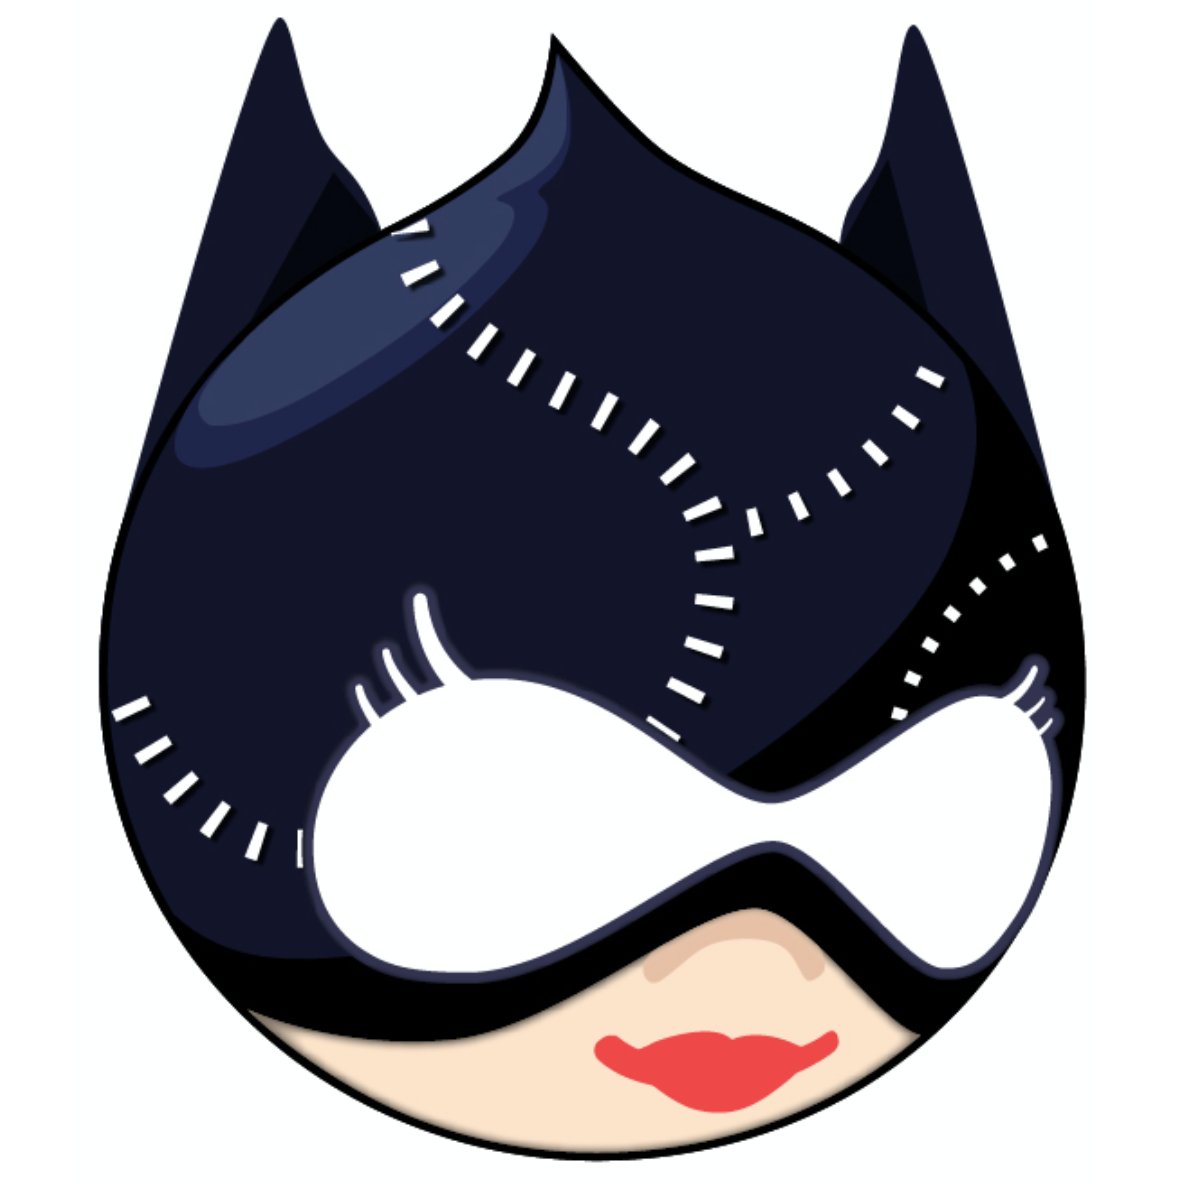 A bunch of #DrupalHeroes are keeping the Internet safe of bugs and bad programming practices. Join them and build the web together. Tweets by @rteijeiro